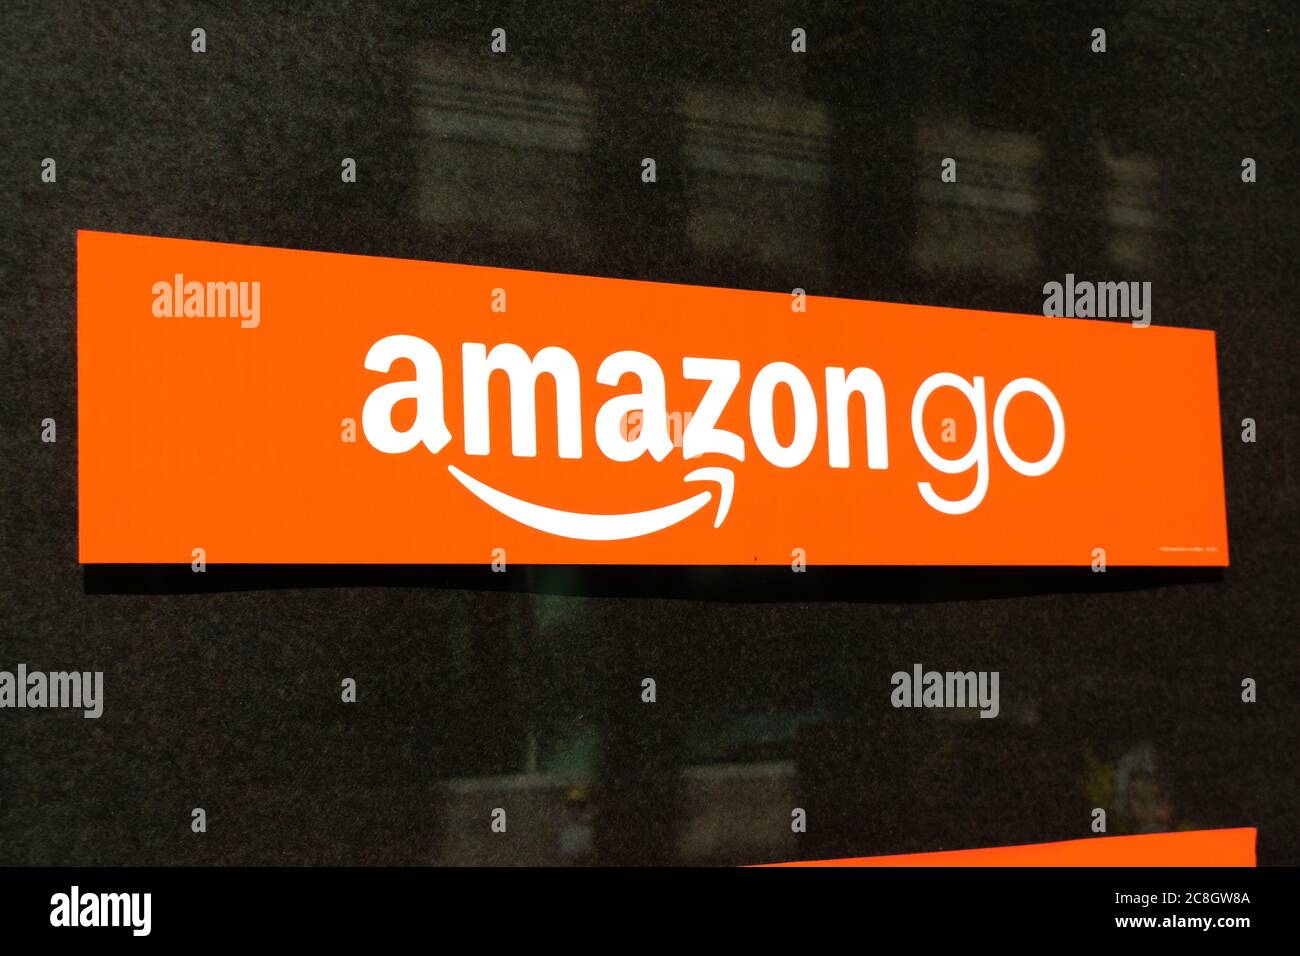 Amazon Go sign on store window. Amazon Go is a chain of cashless convenience stores with automated checkout, operated by Amazon - San Francisco, Calif Stock Photo